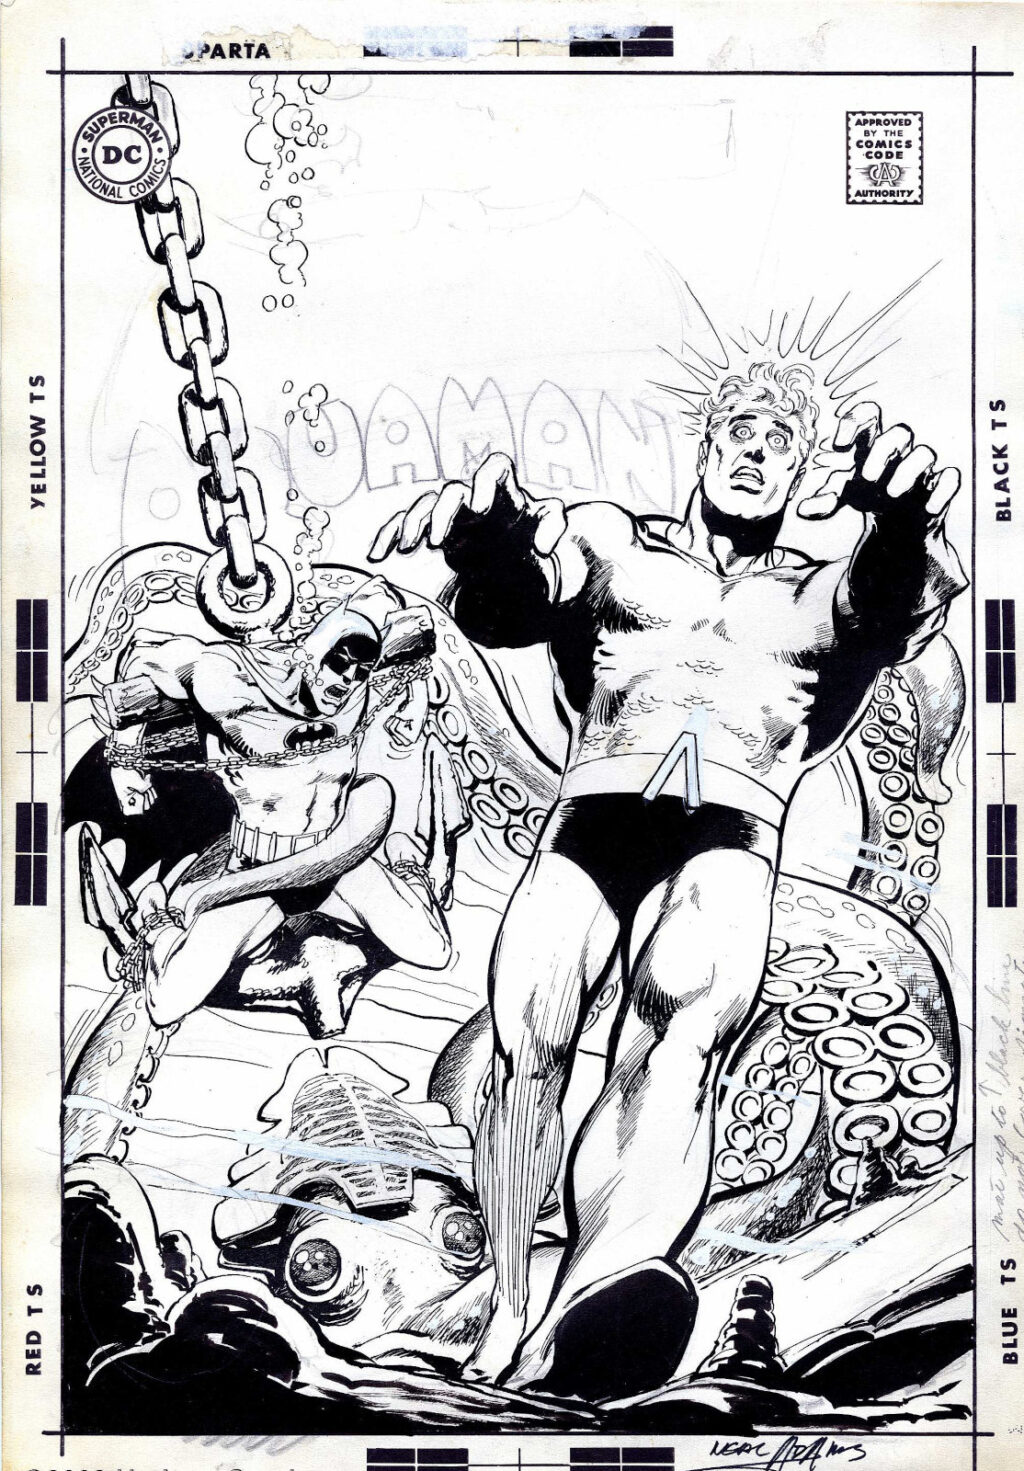 The Brave and The Bold issue 83 cover by Neal Adams and Dick Giordano